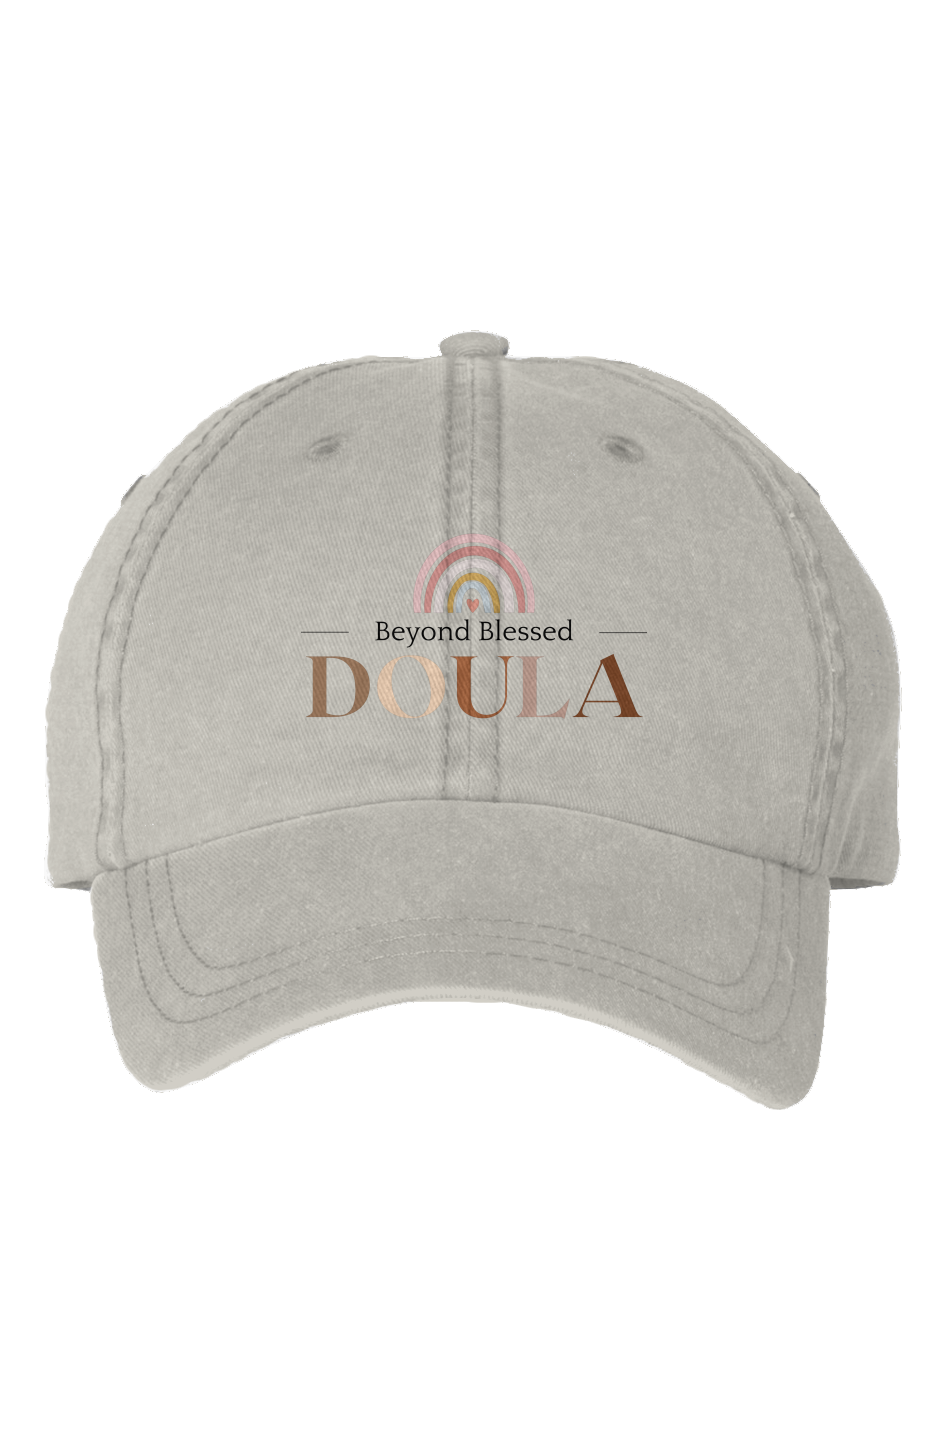 Beyond Blessed Doula - Dyed Cap